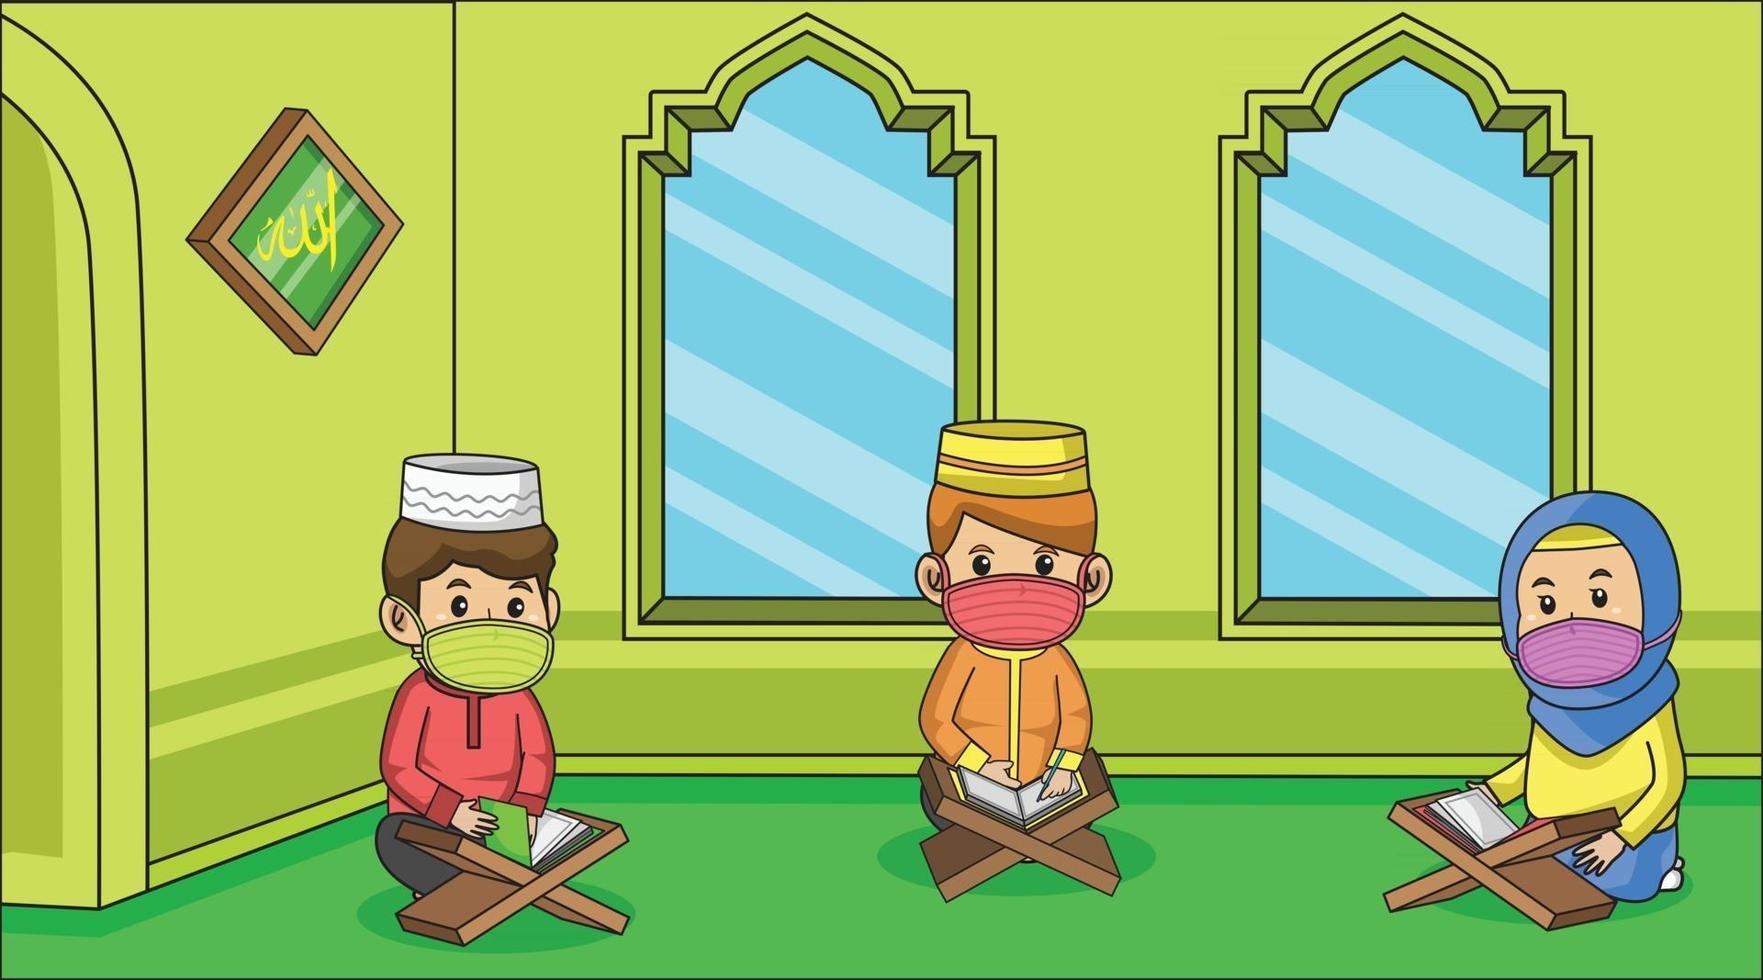 During the corona virus pandemic, muslim inside mosque, in ramadan month. children reading holy book muslim, using masks and health protocols. children book illustration. vector